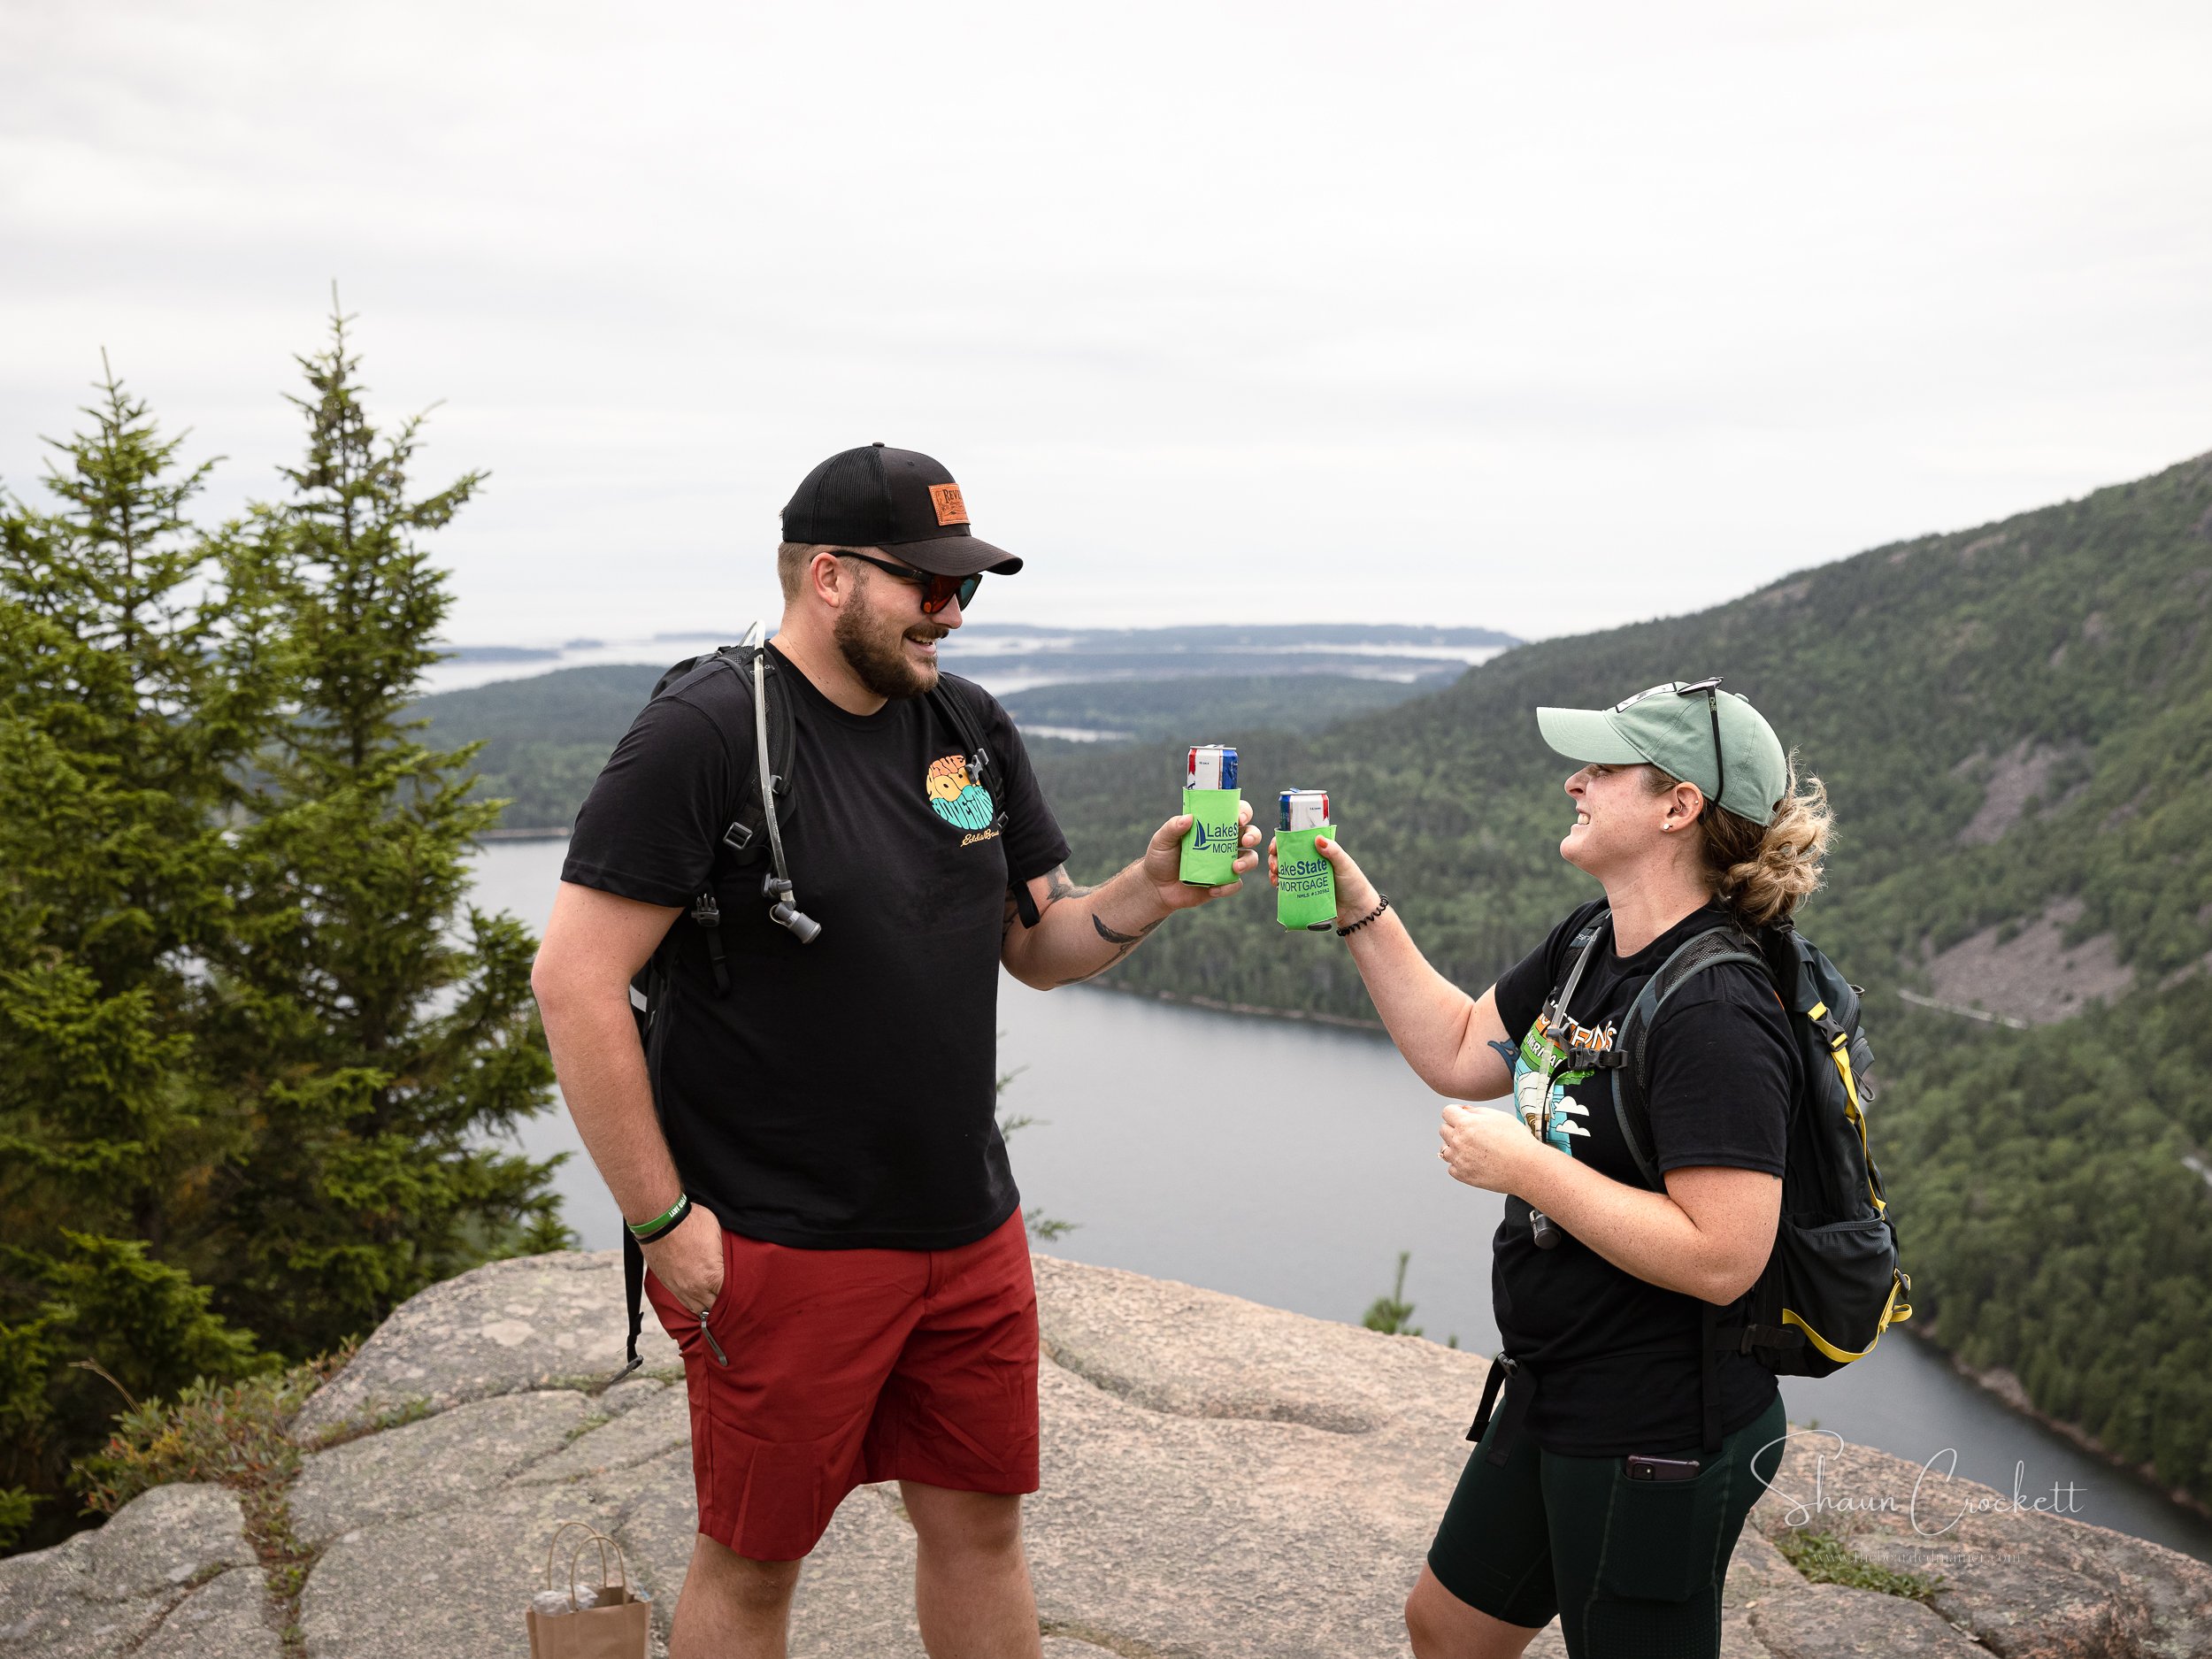 Proposal in Acadia National Park